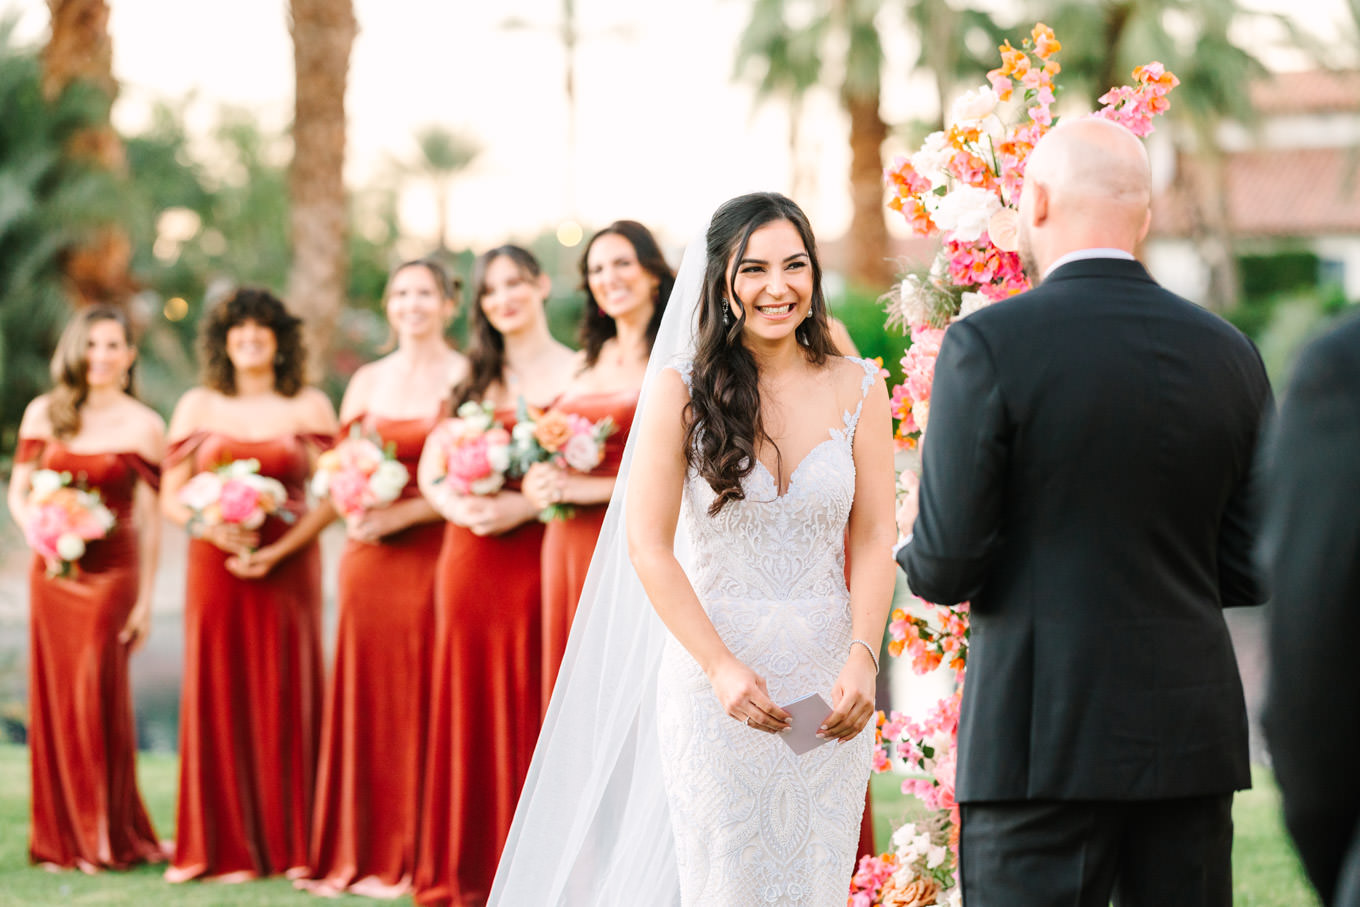 Couple exchanging vows | Pink Bougainvillea Estate wedding | Colorful LA wedding photography | #bougainvilleaestate #palmspringswedding #palmspringsweddingvenue #palmspringsphotographer Source: Mary Costa Photography | Los Angeles